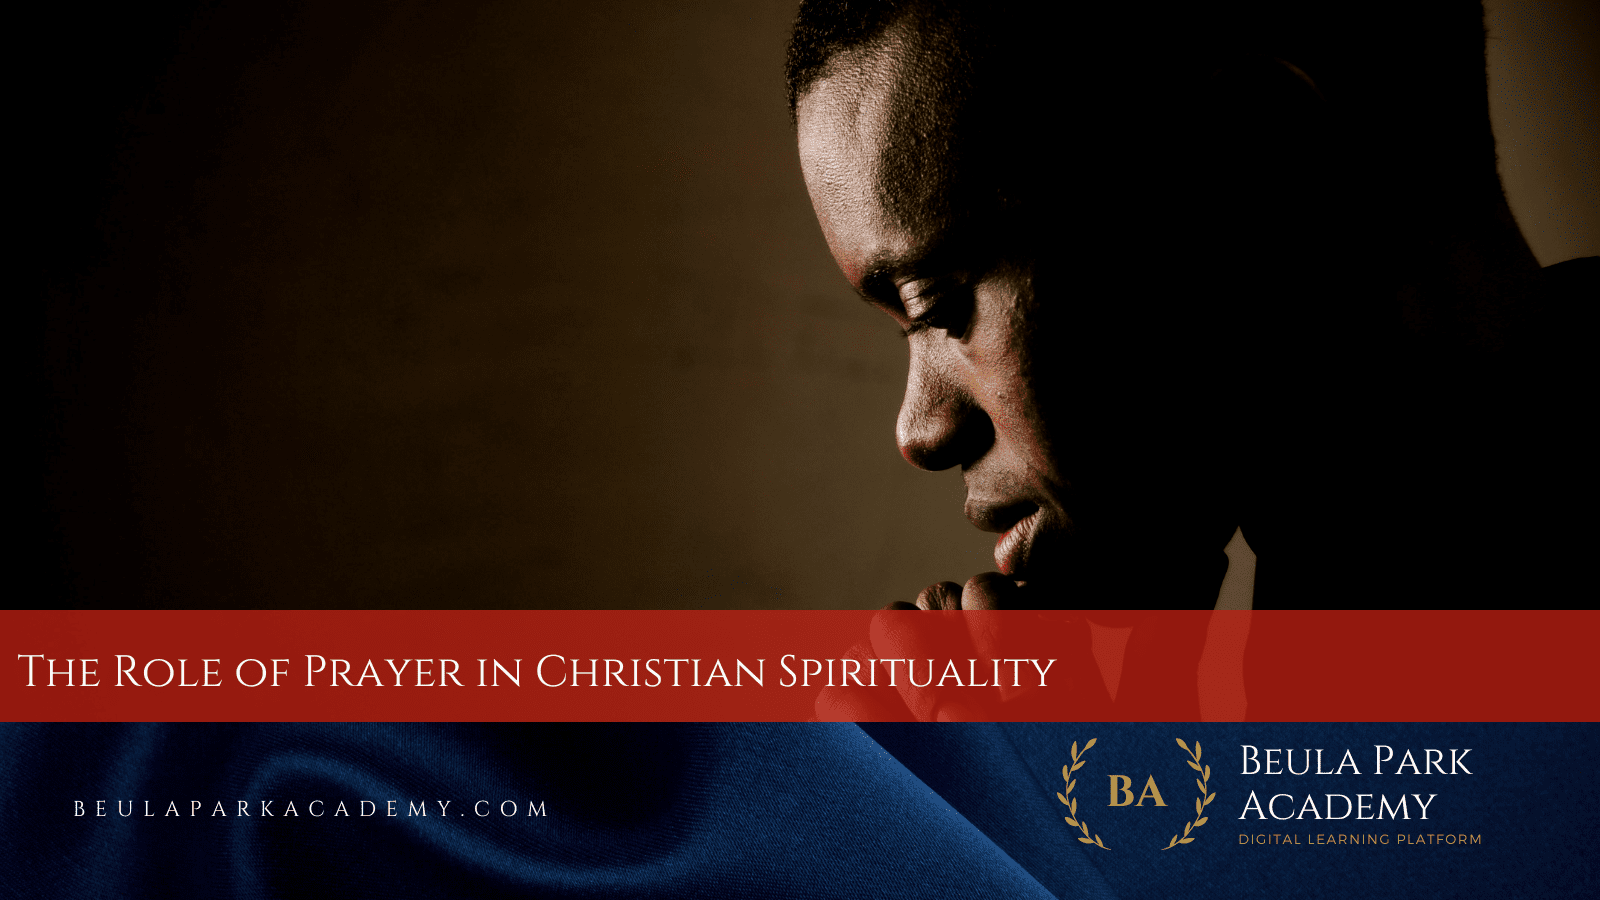 The Role of Prayer in Christian Spirituality